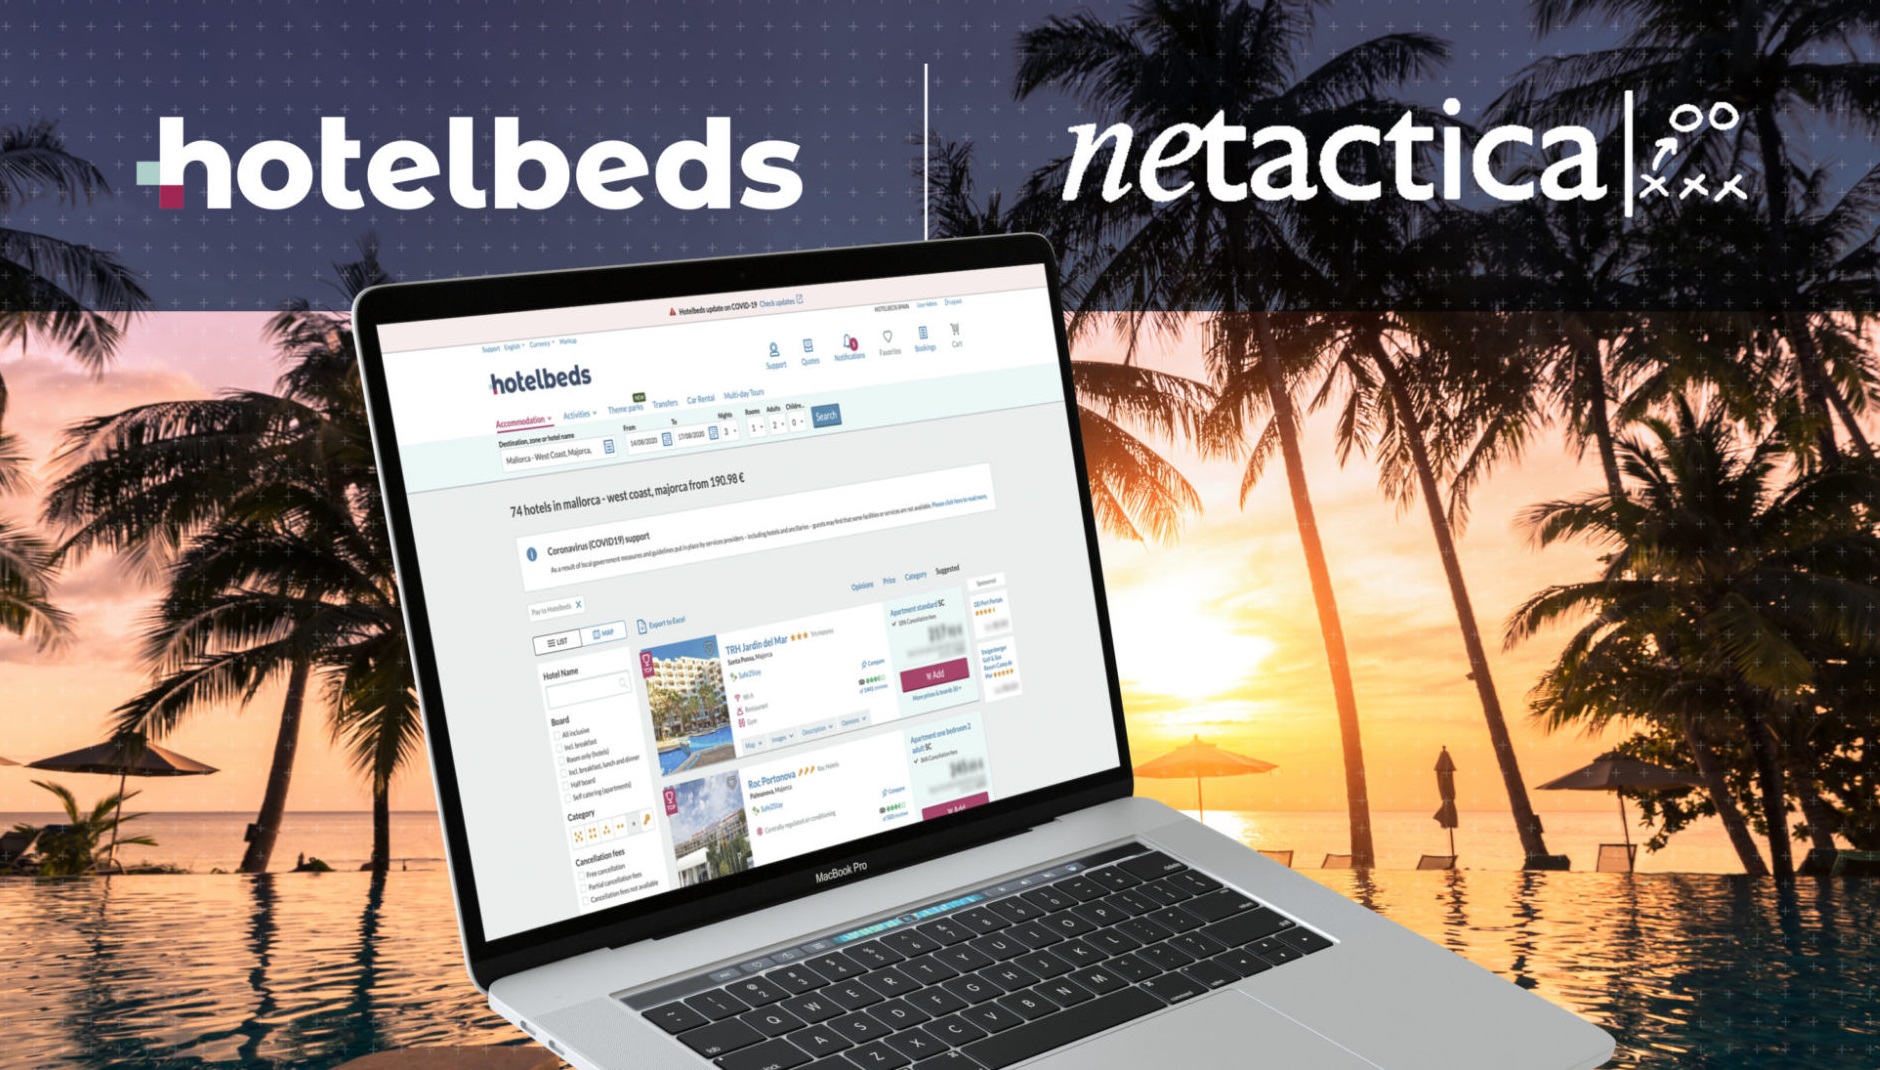 Latin American Travel Tech Firm Netactica Agrees Hotelbeds Tie-Up